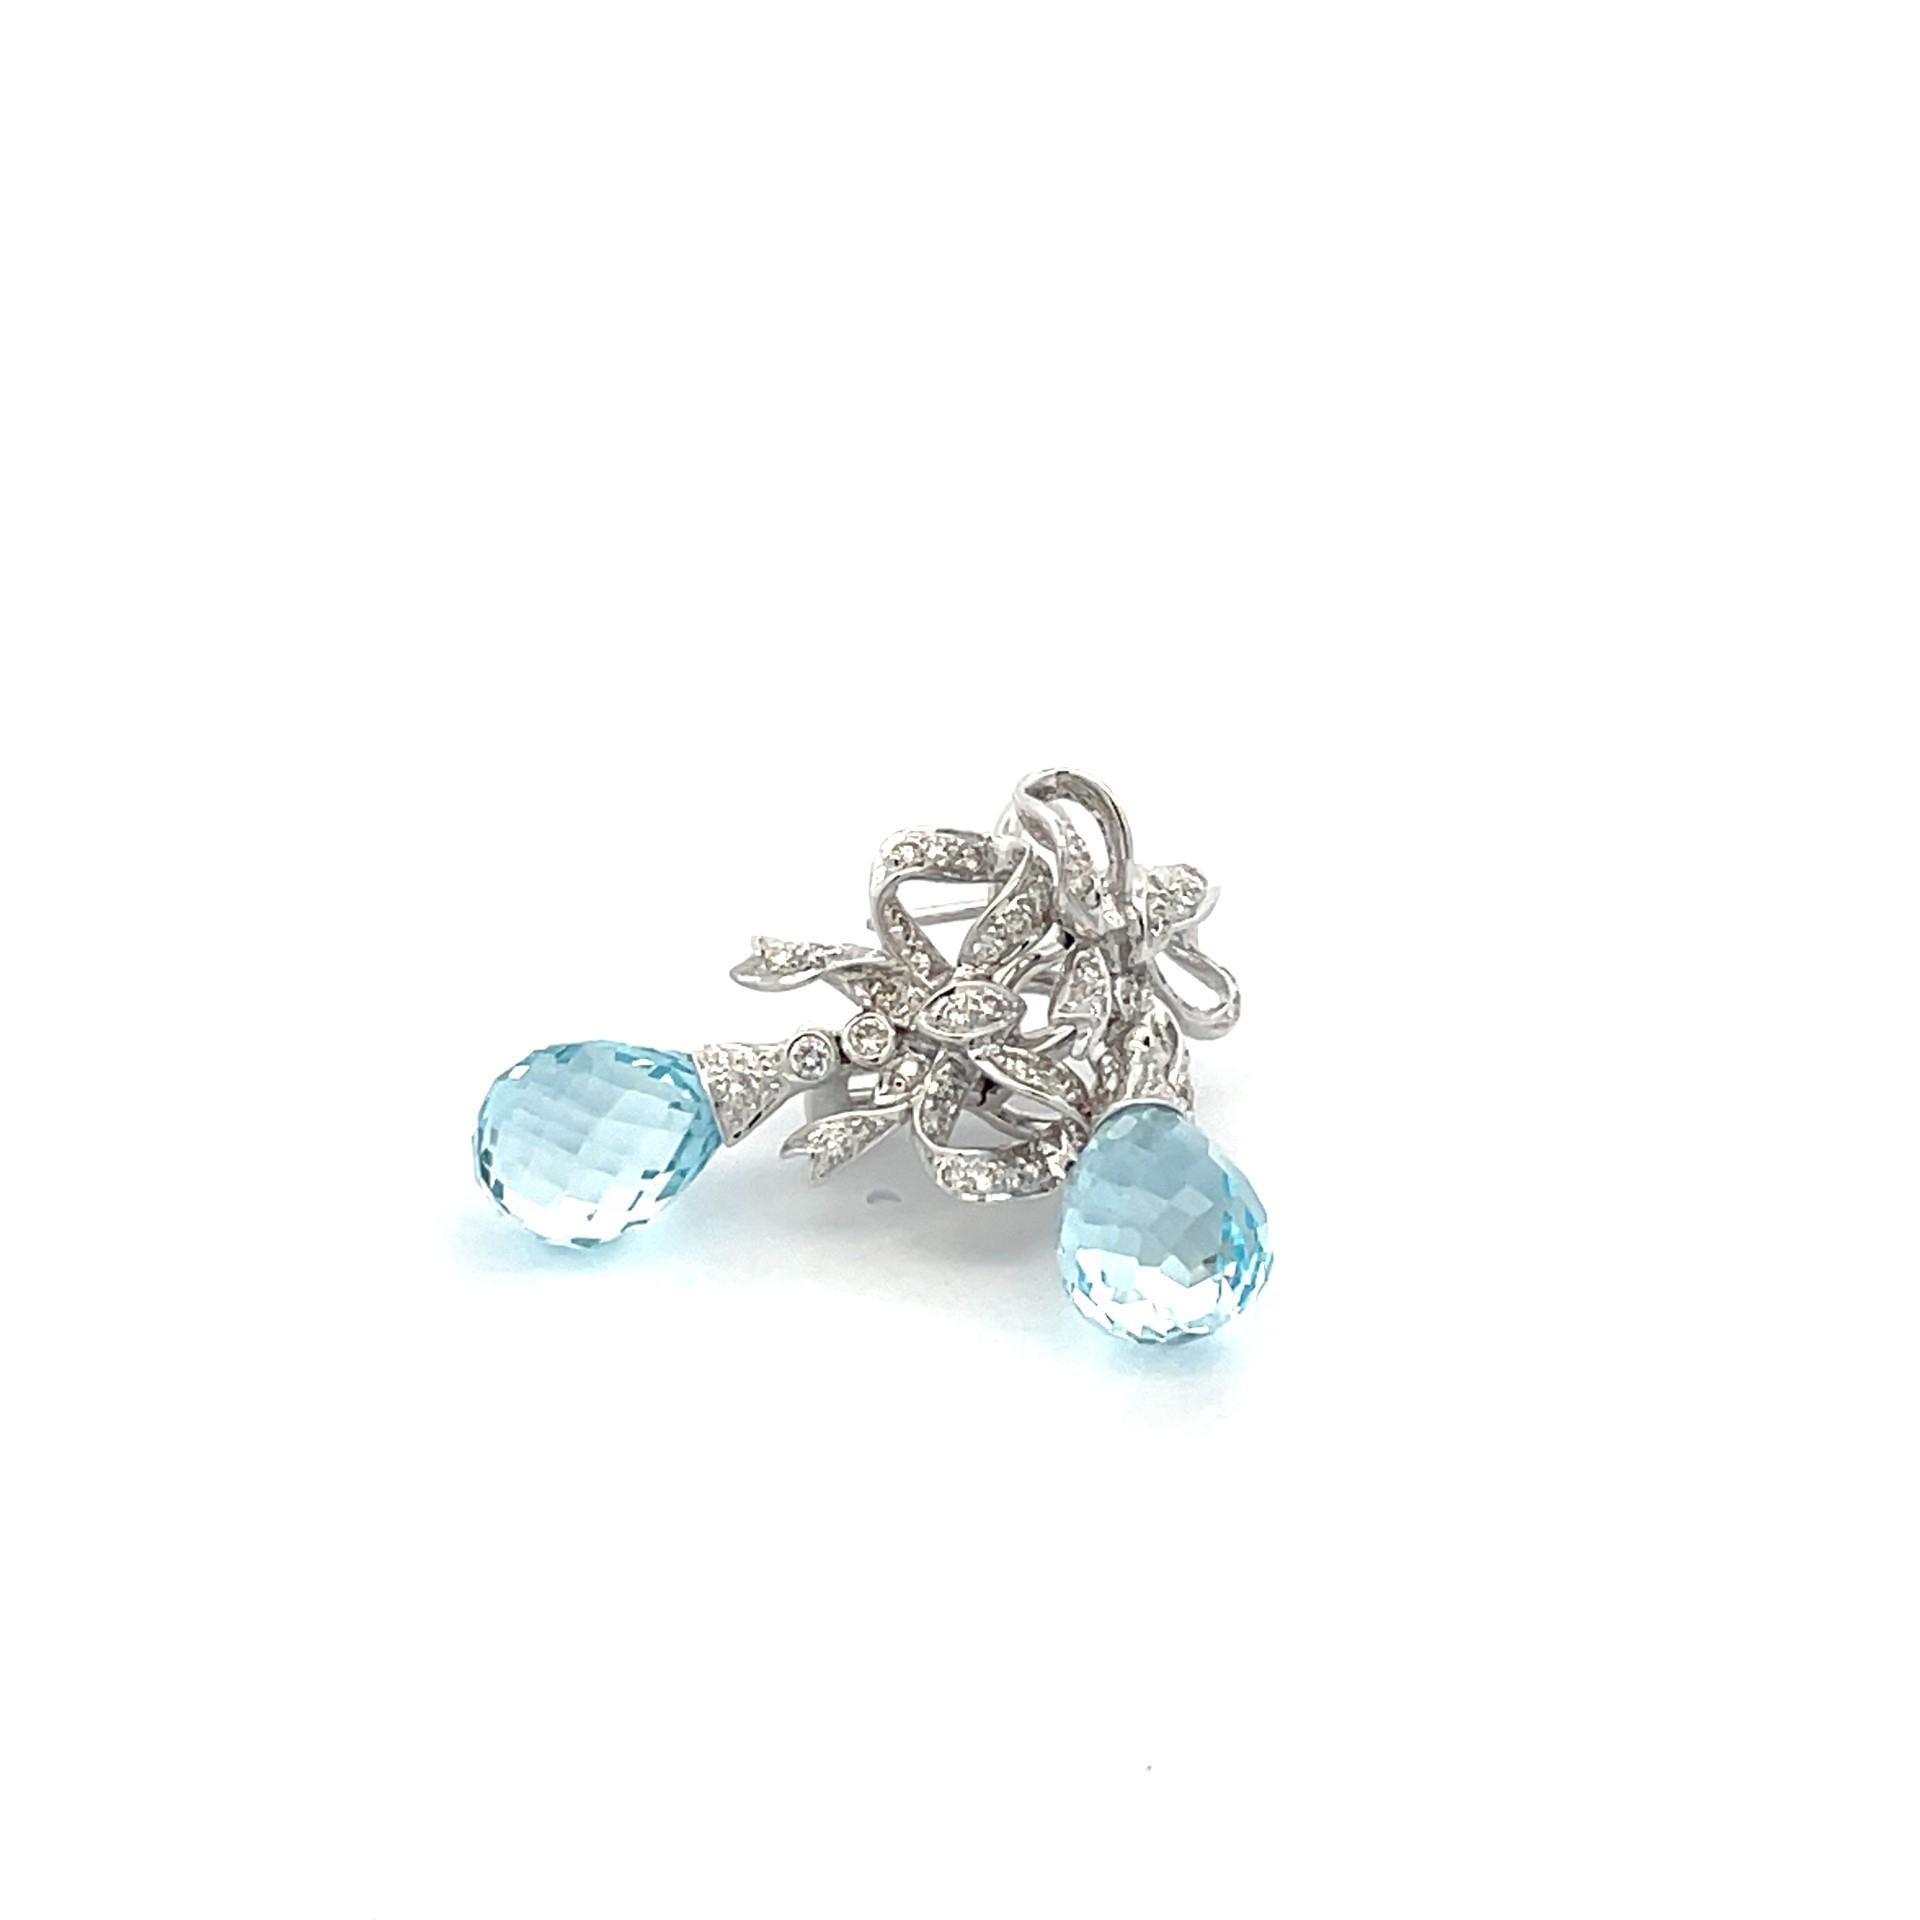 Blue topaz bow earrings set in 18 karat white gold featuring 2 briolette cut blue topaz and white diamond accents  with a straight post and omega clip system. 

60 brilliant cut diamond  0.78ct total weight

2 blue topaz briolette 15.80ct total